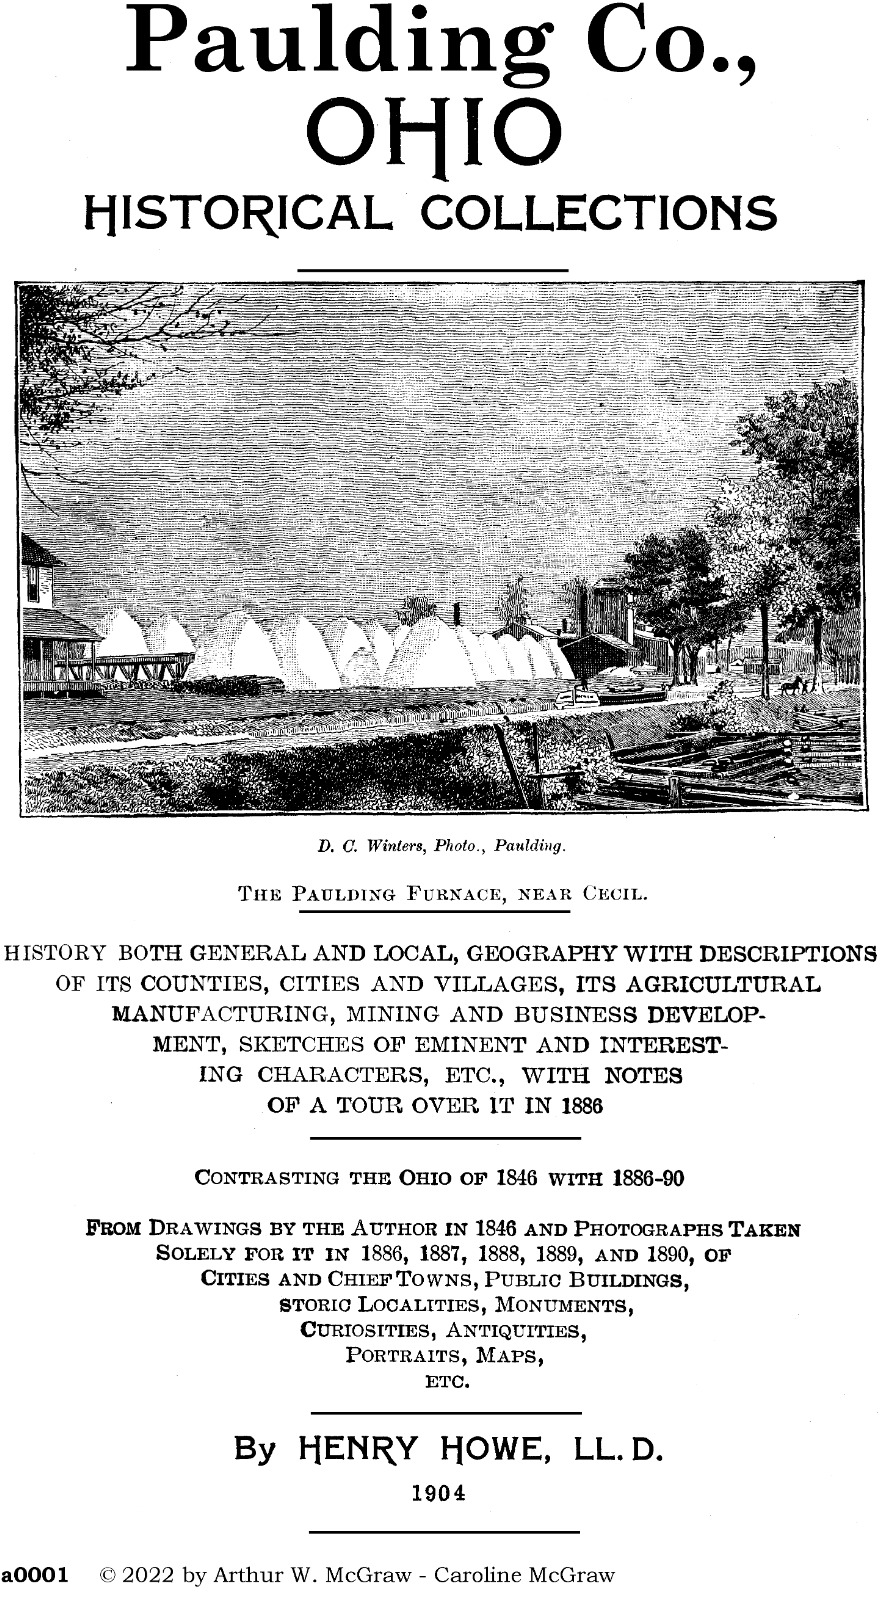 Paulding Co., Ohio Historical Collections 1904 by Henry Howe - pdf